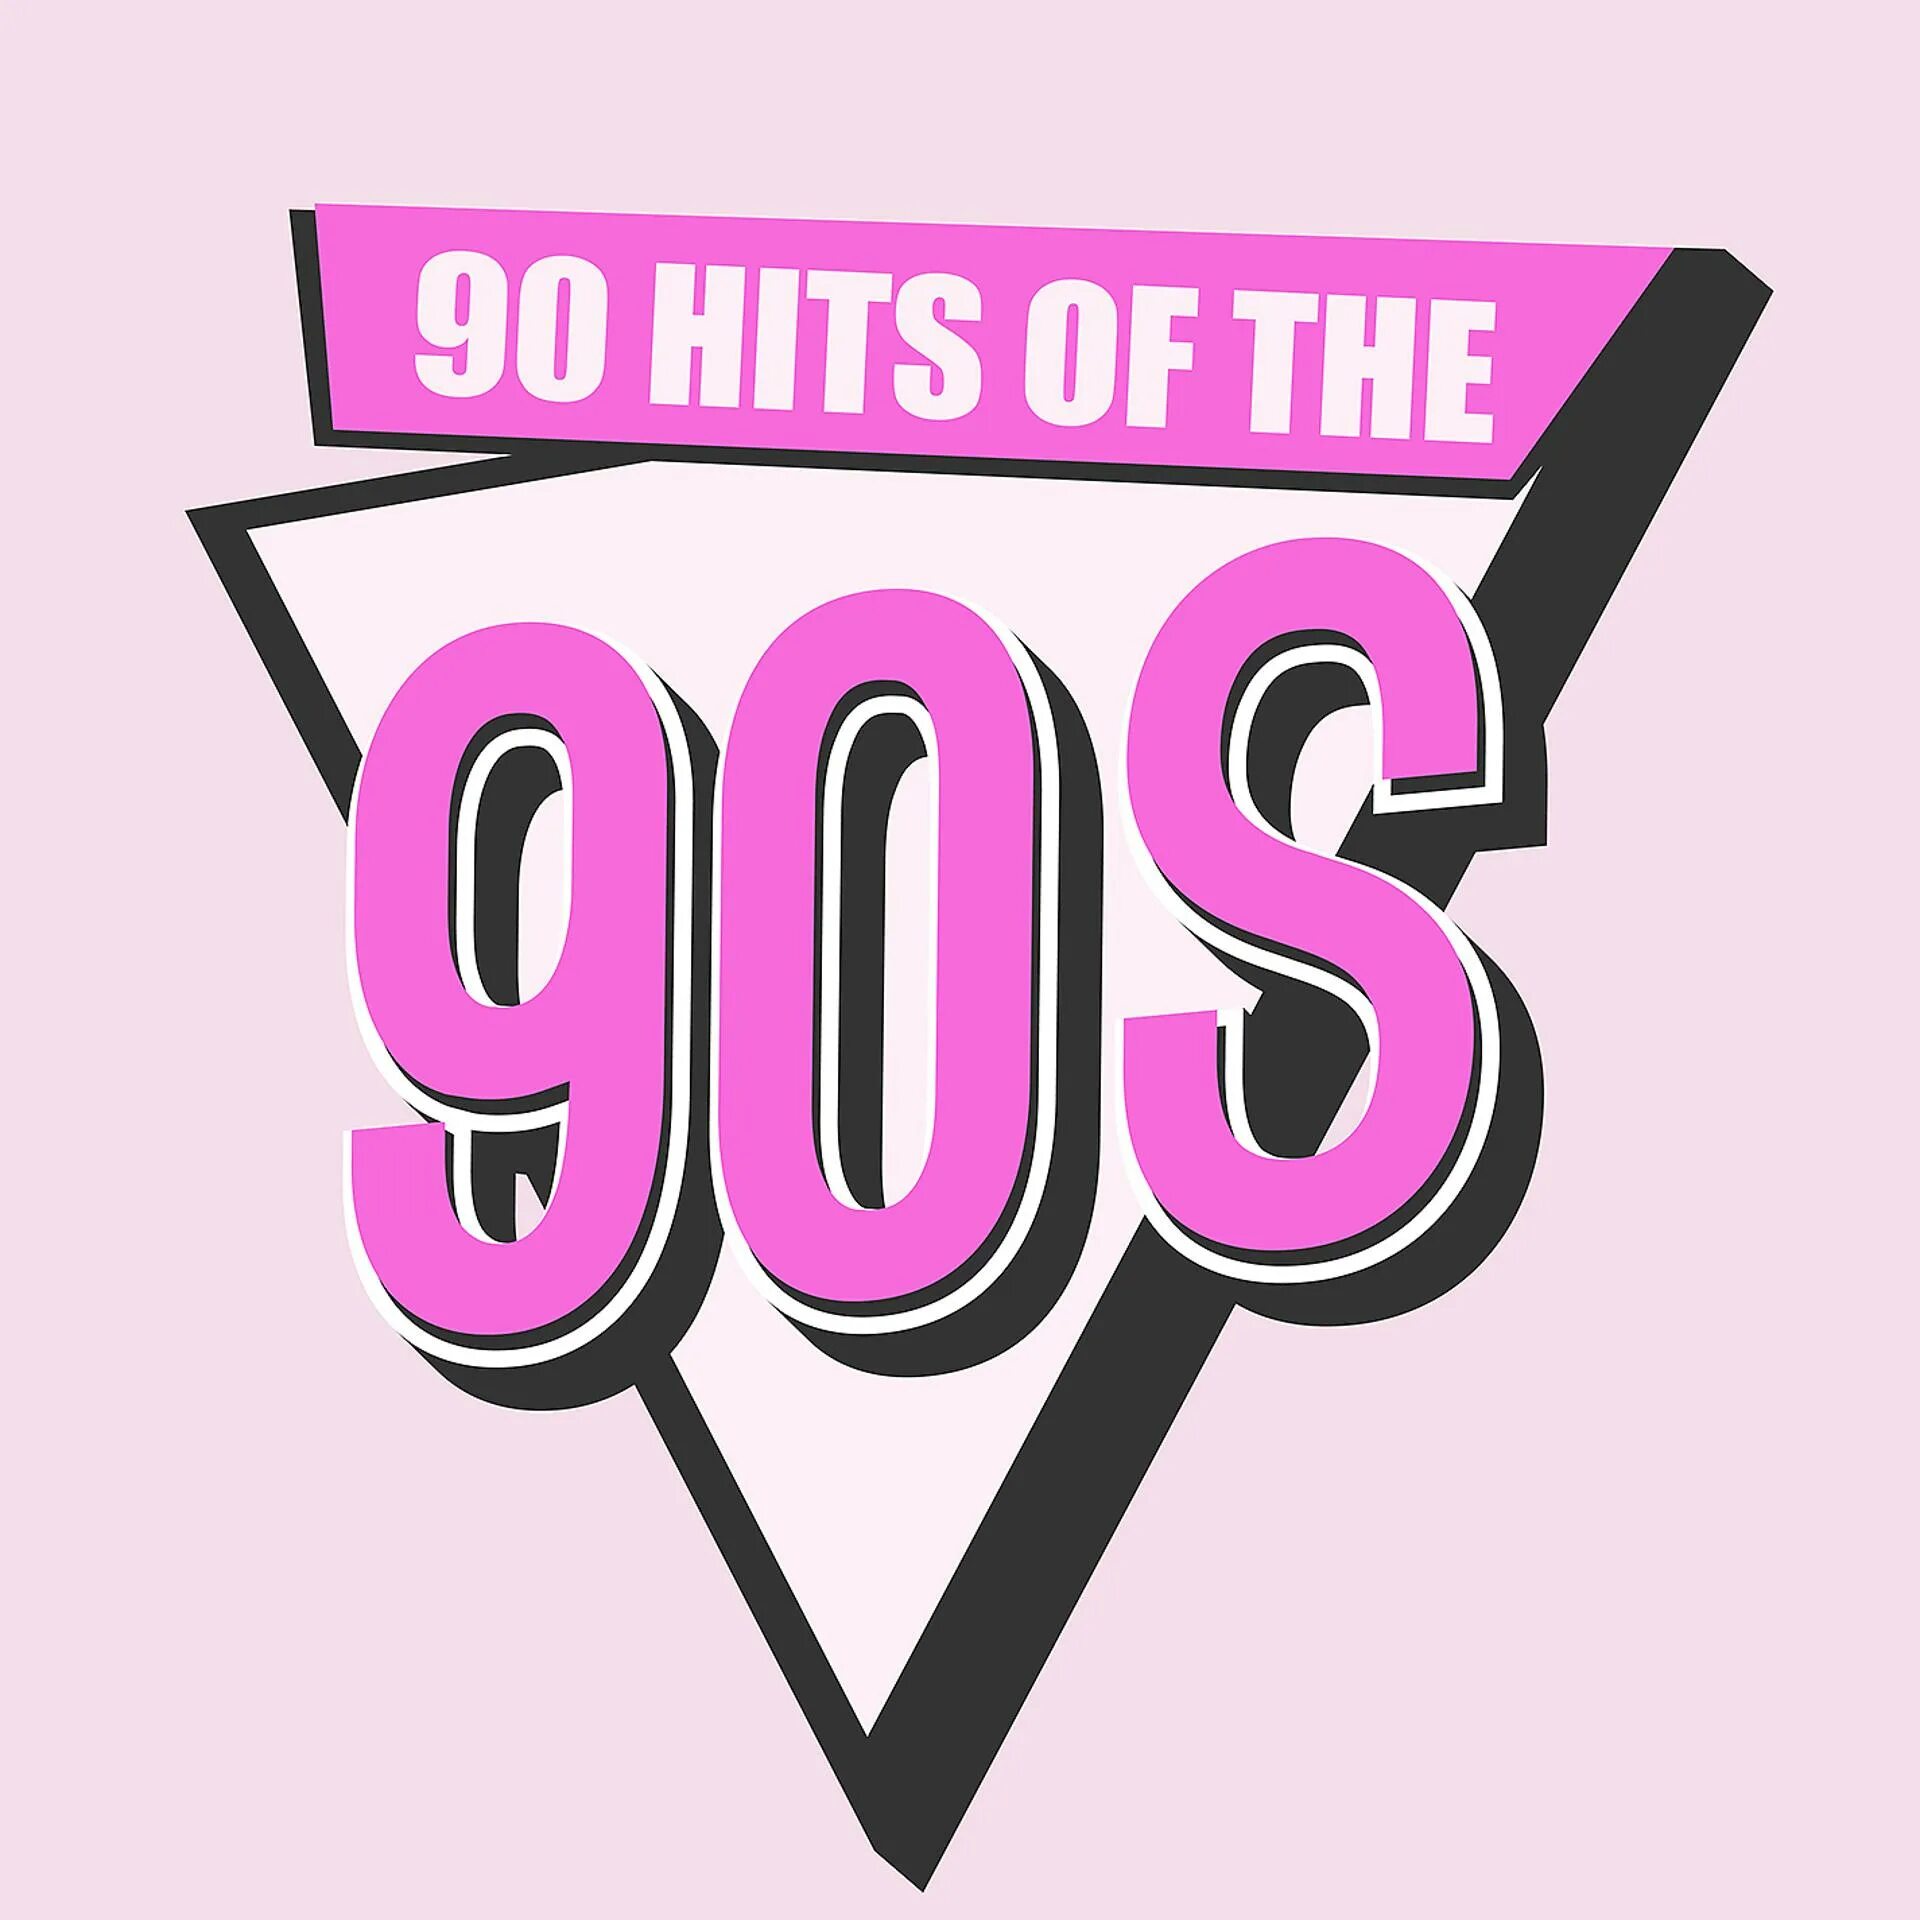 Hit of the 90's альбомы. Pop Hits 90s. Various artists Hits of the 90's. Hits 90 s